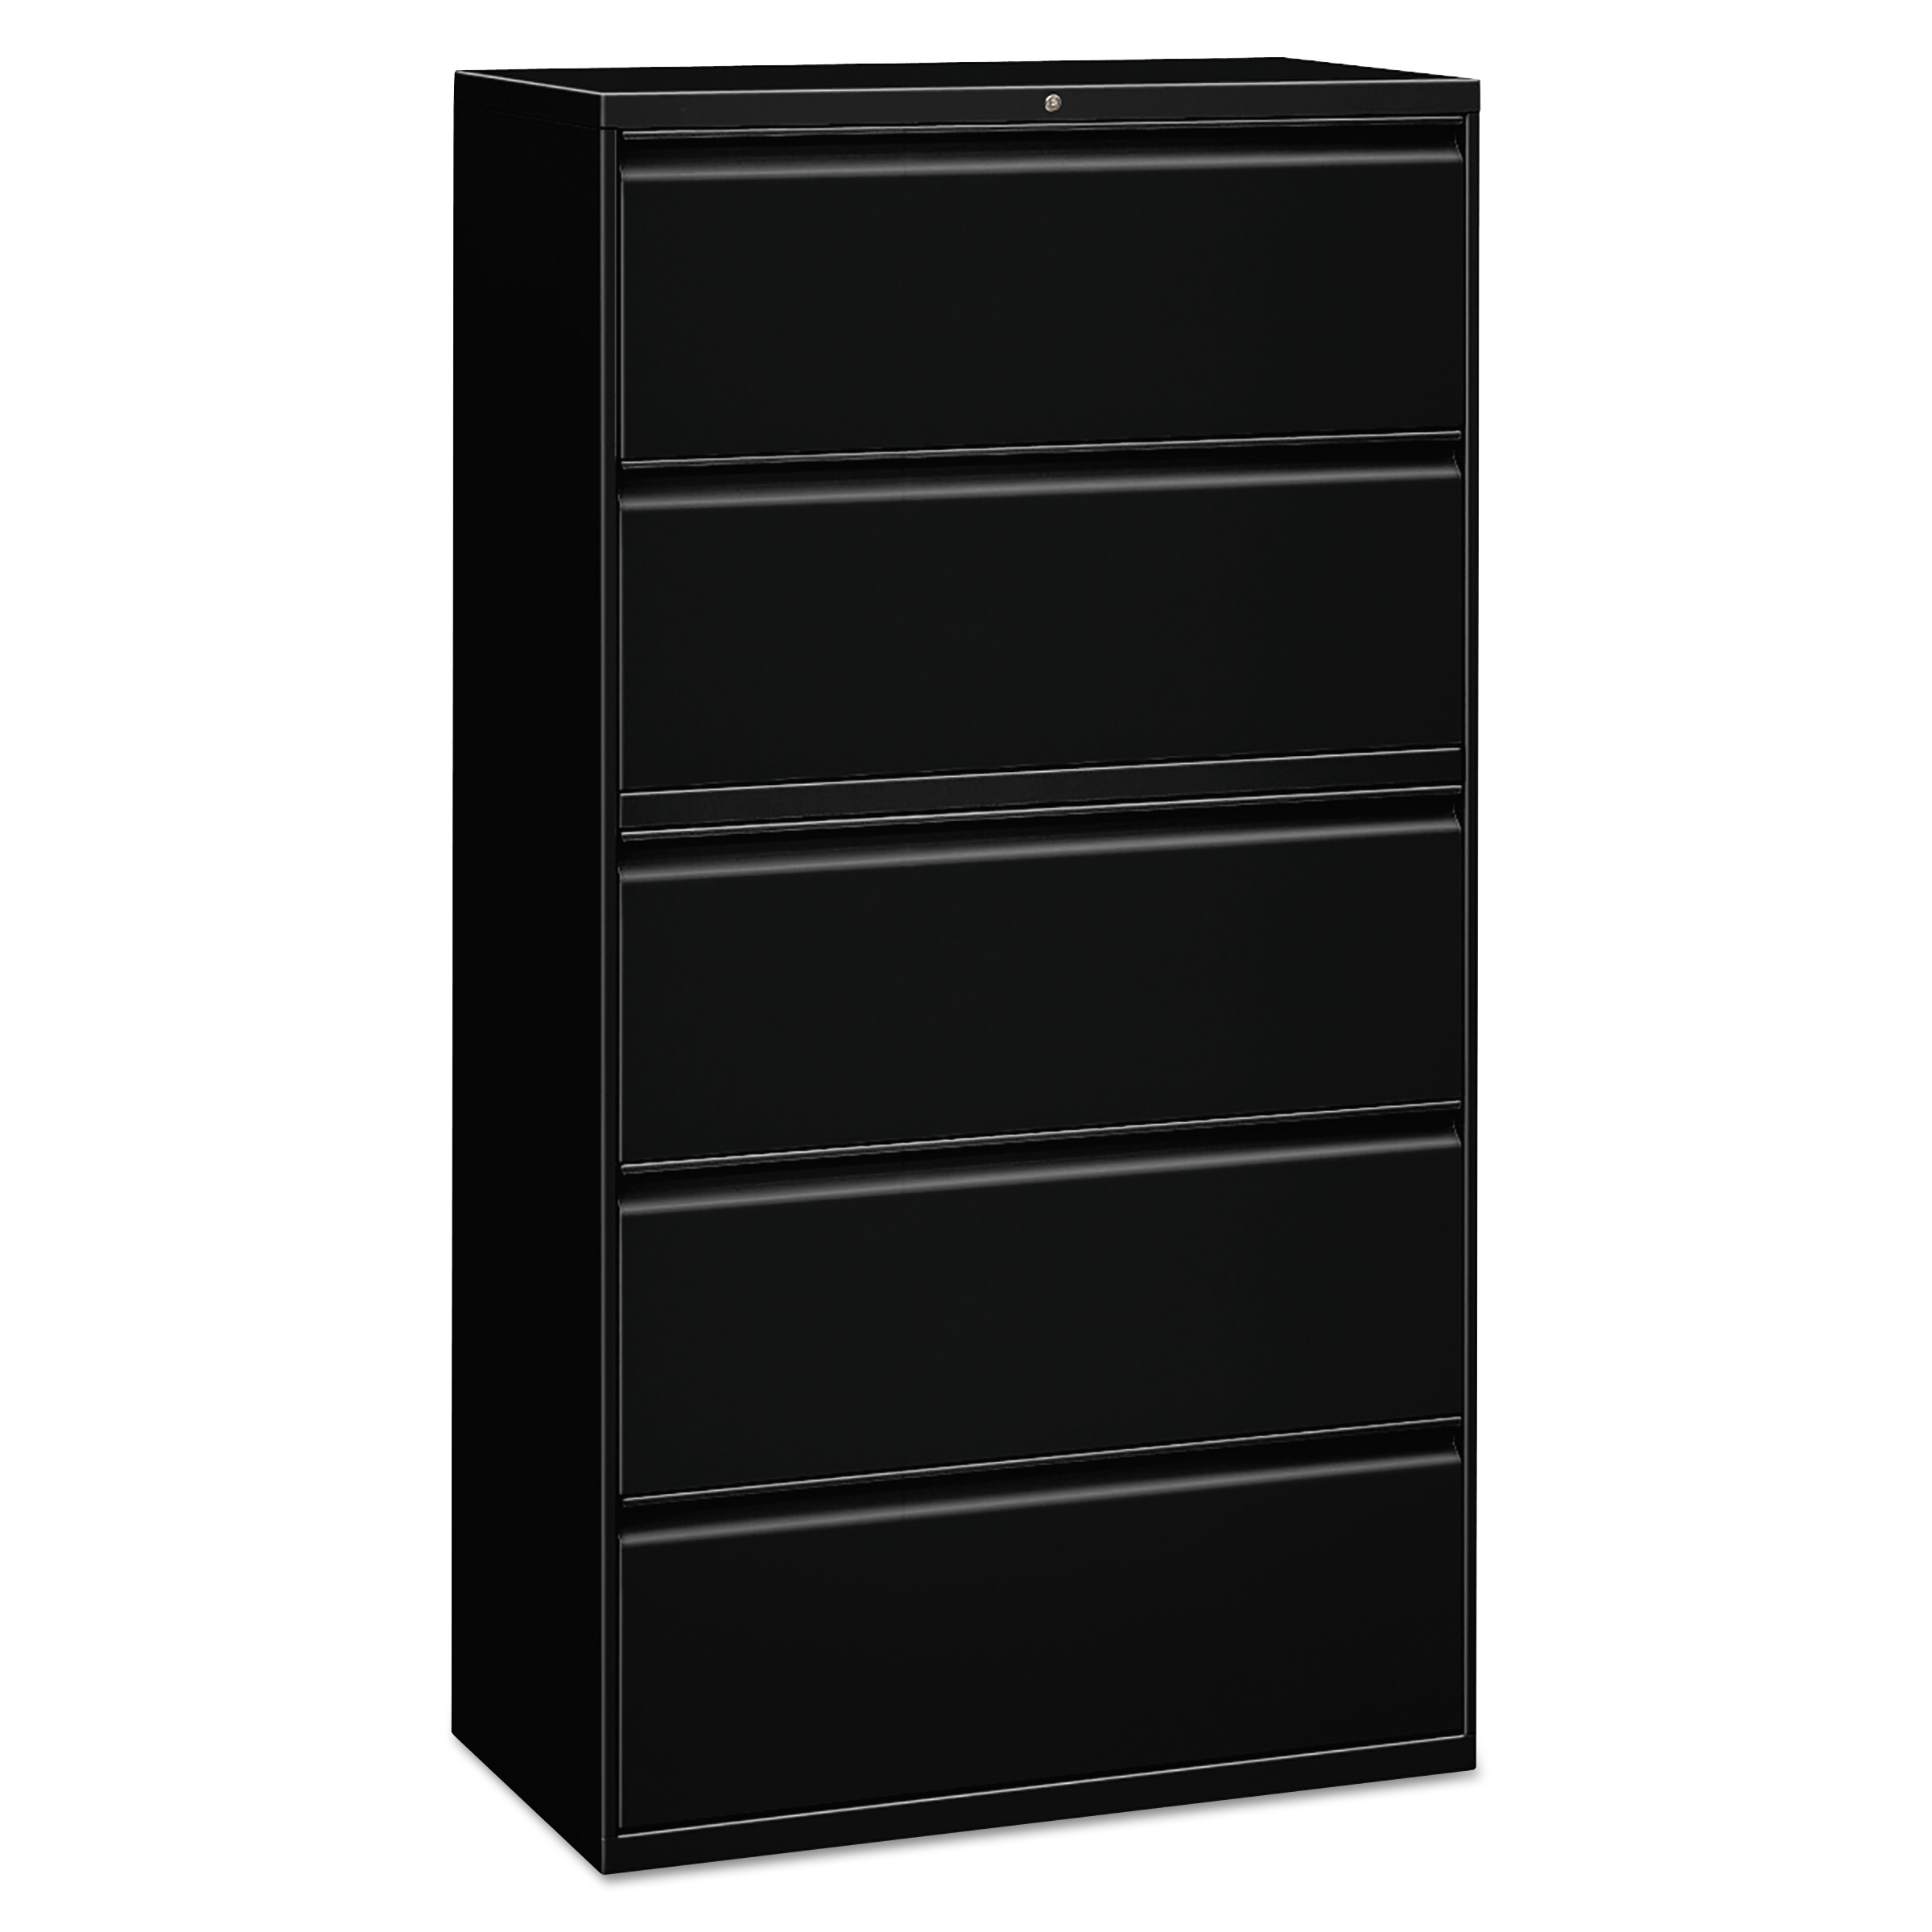 Five-Drawer Lateral File Cabinet, 36w x 18d x 64 1/4h, Black